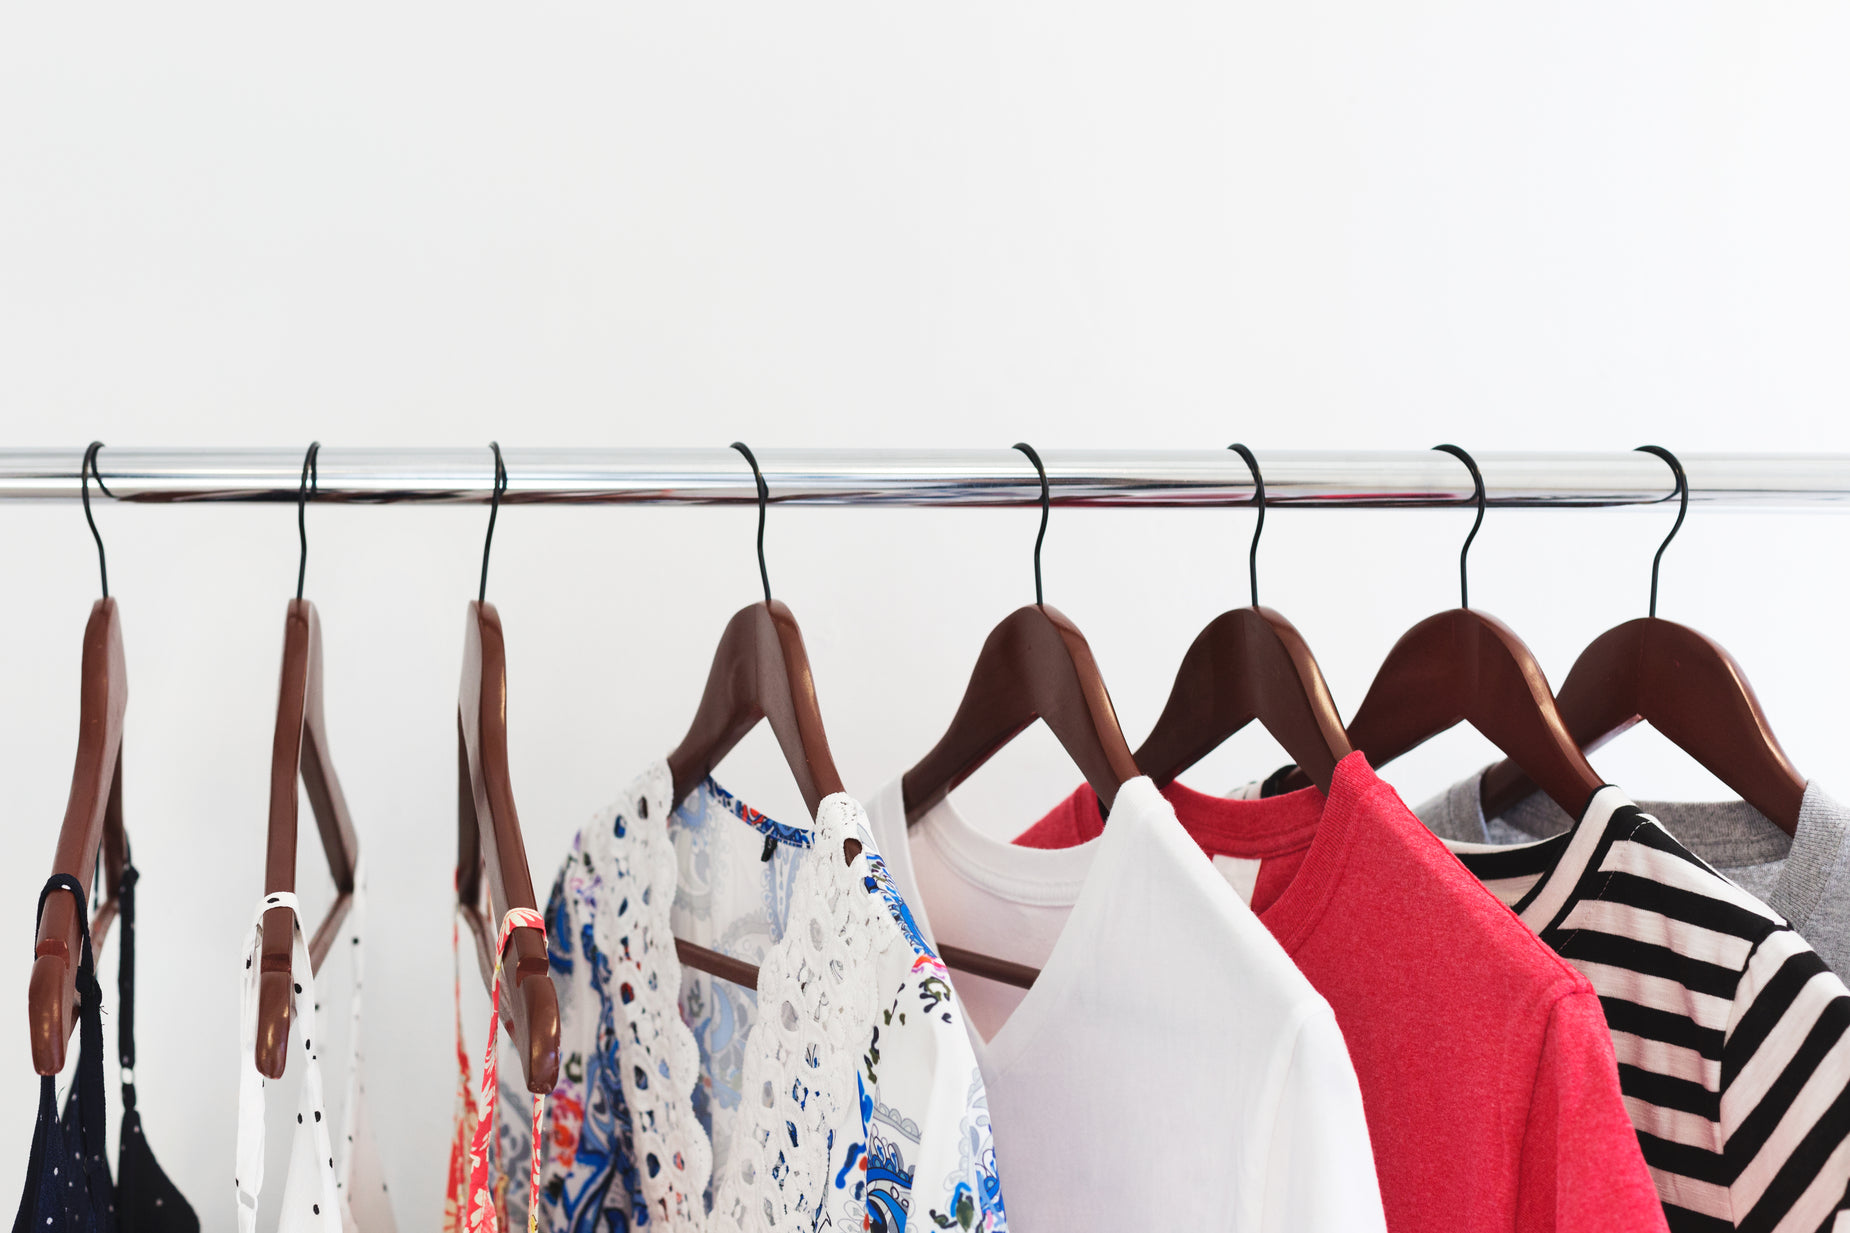 several women's shirts hung on hooks in a closet